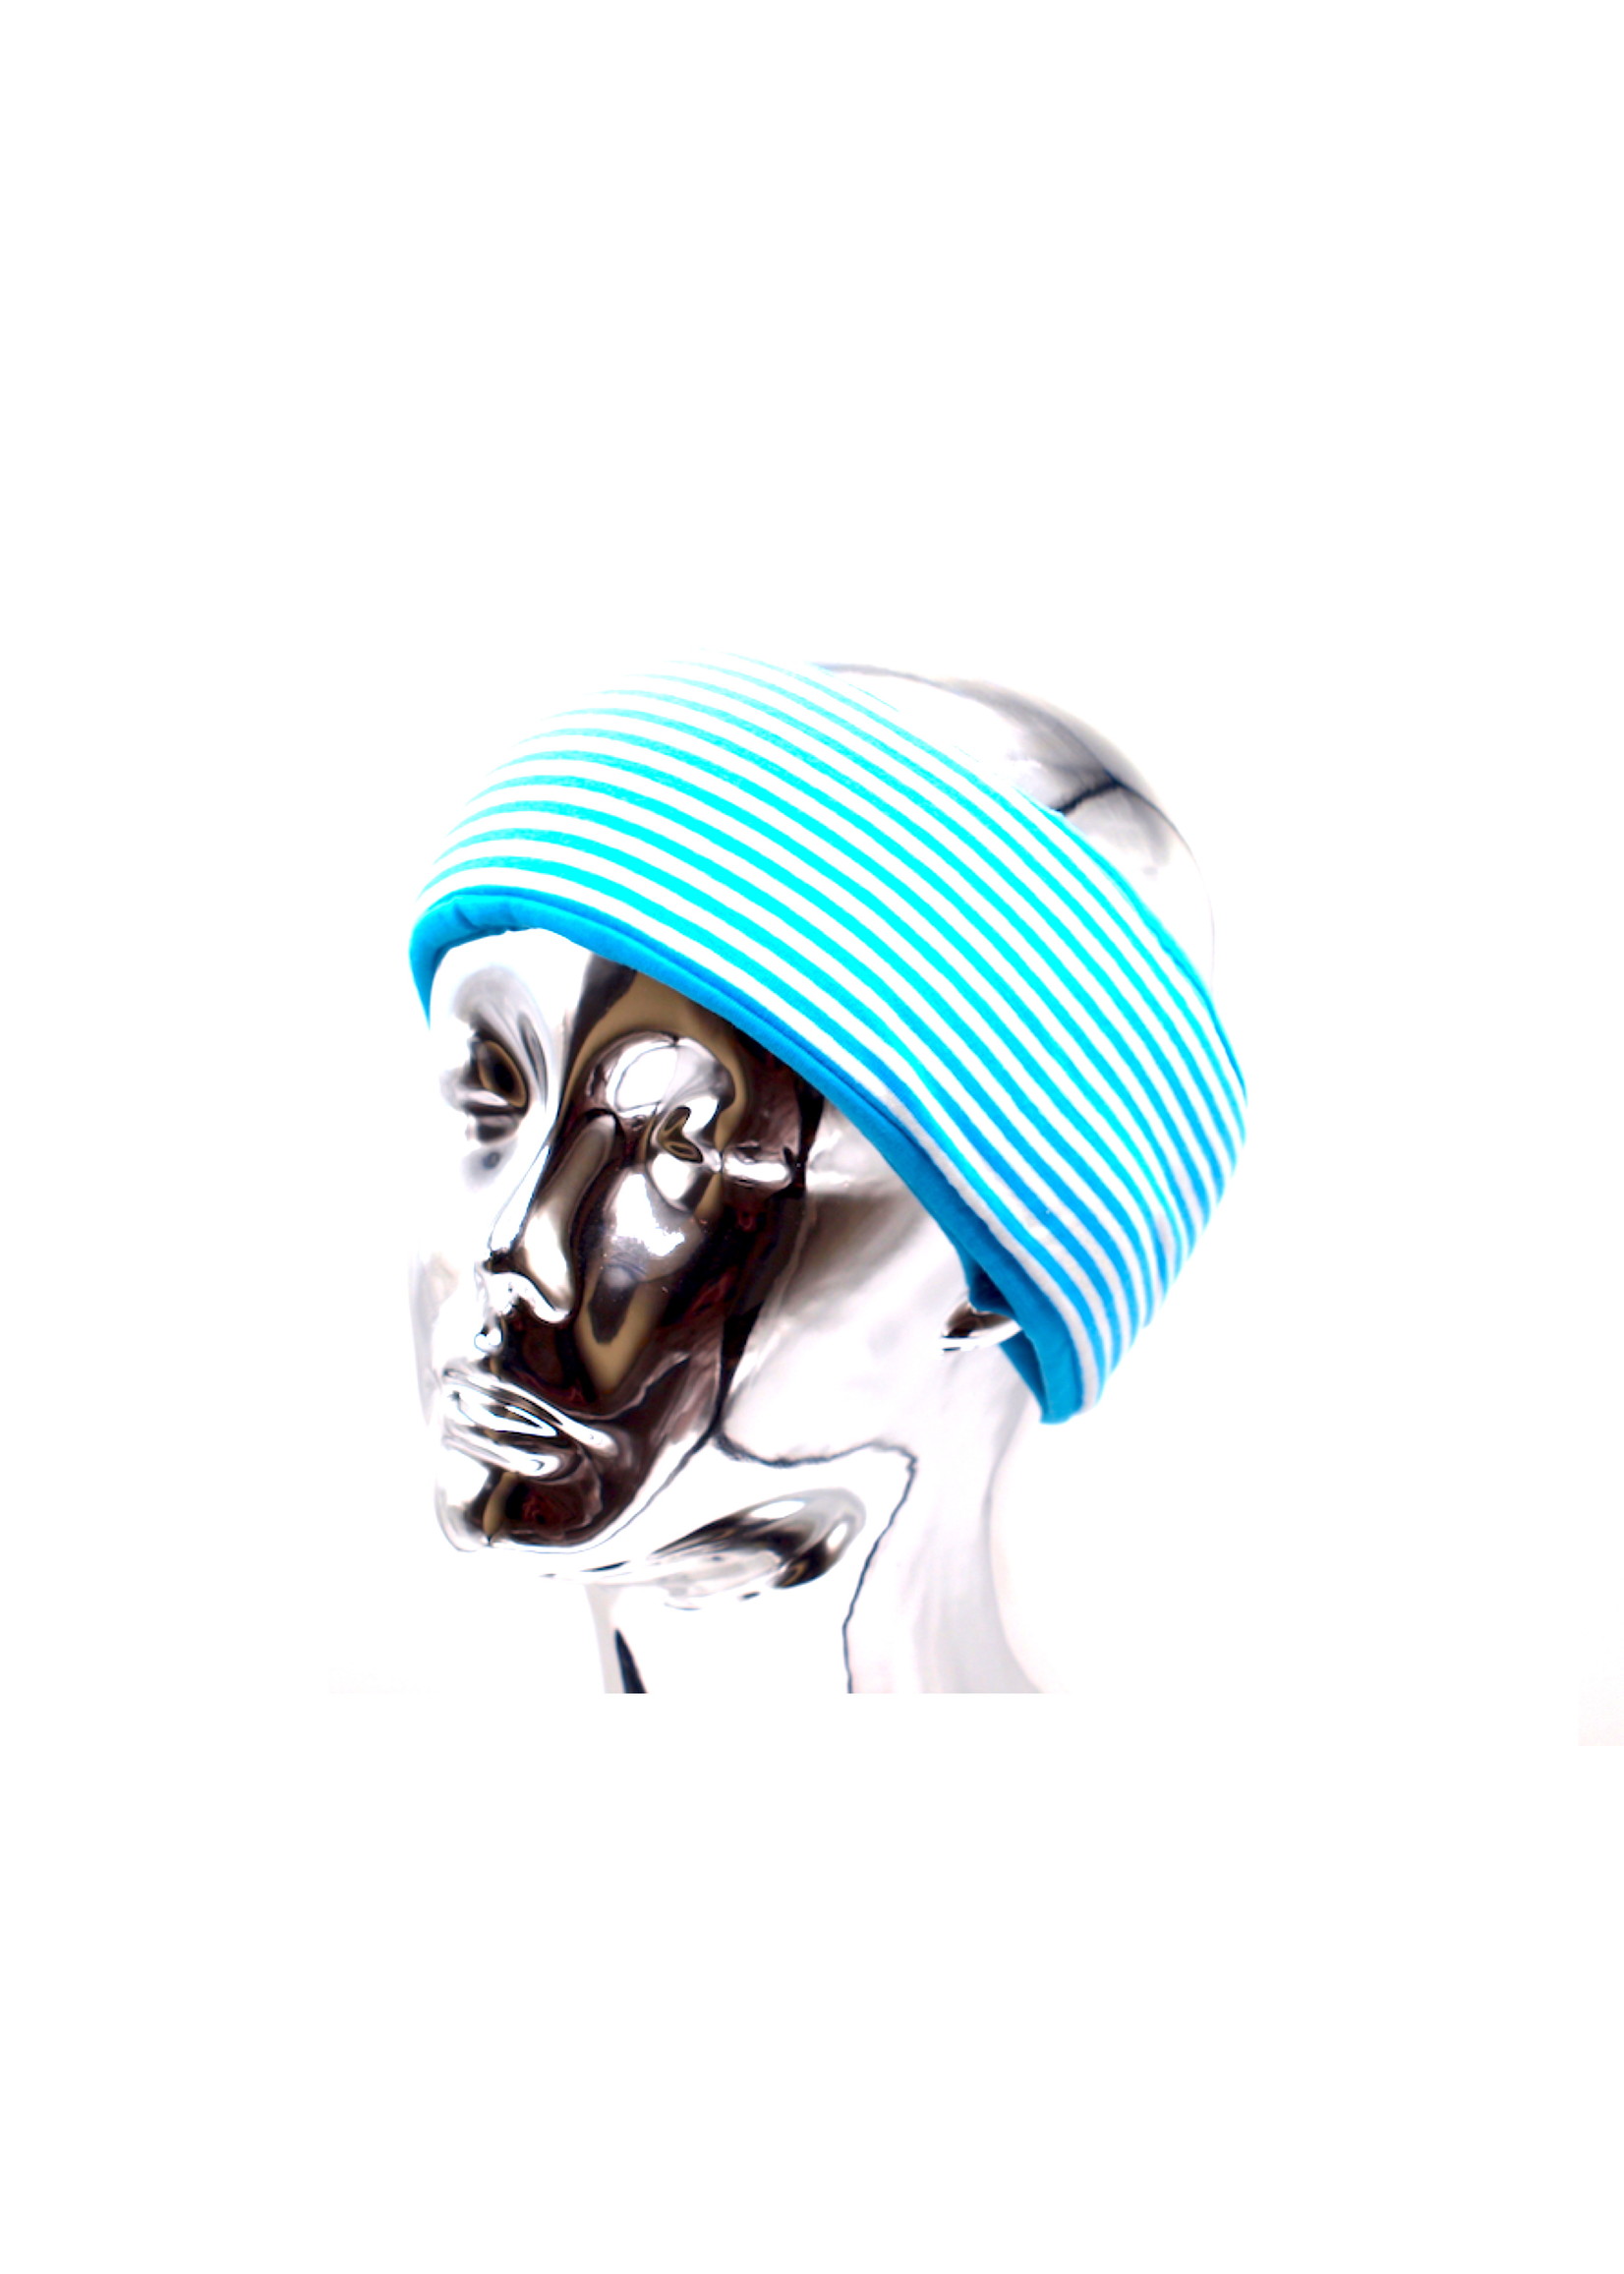 Headband "classic stripes" with light blue and white stripes